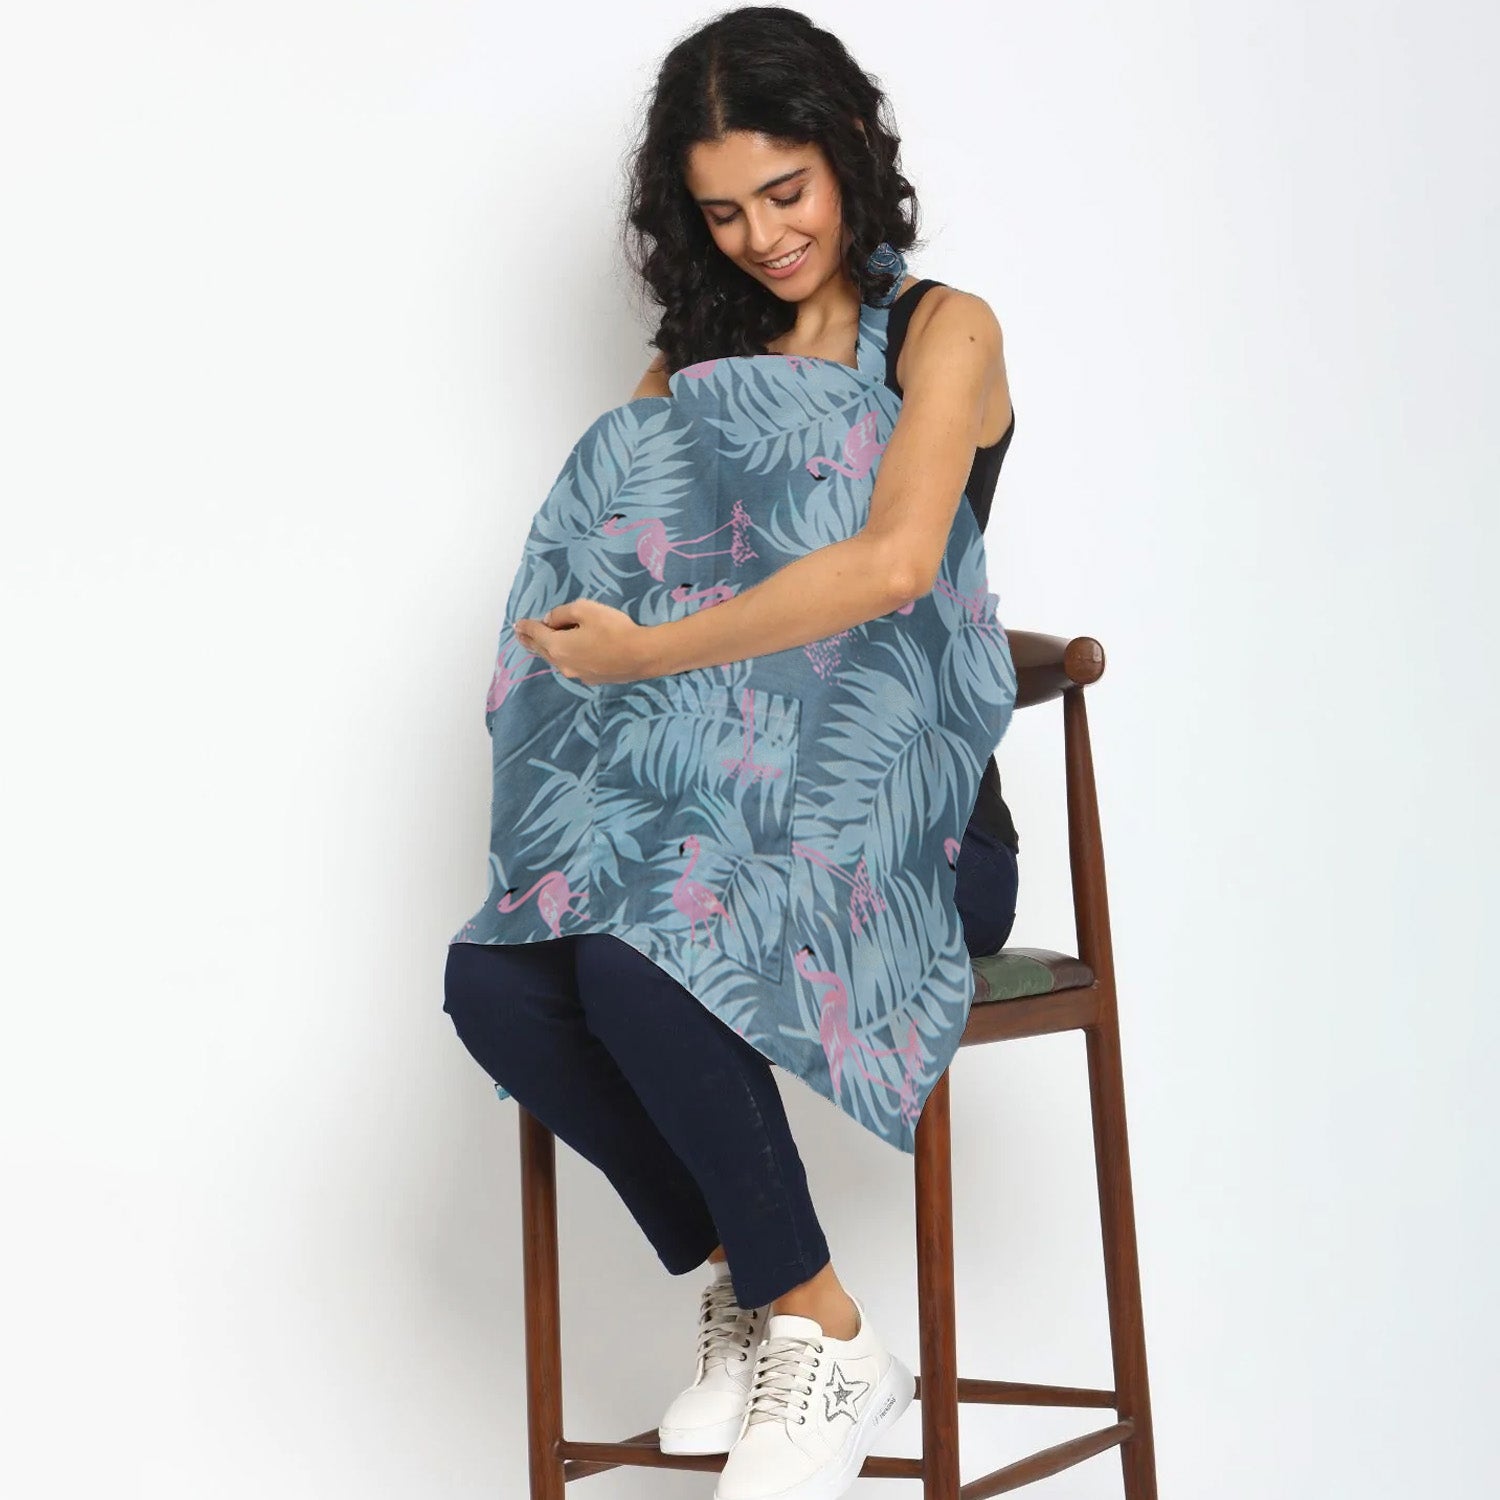 10 Best Nursing Covers of 2022 - Scarves and Ponchos for Breastfeeding